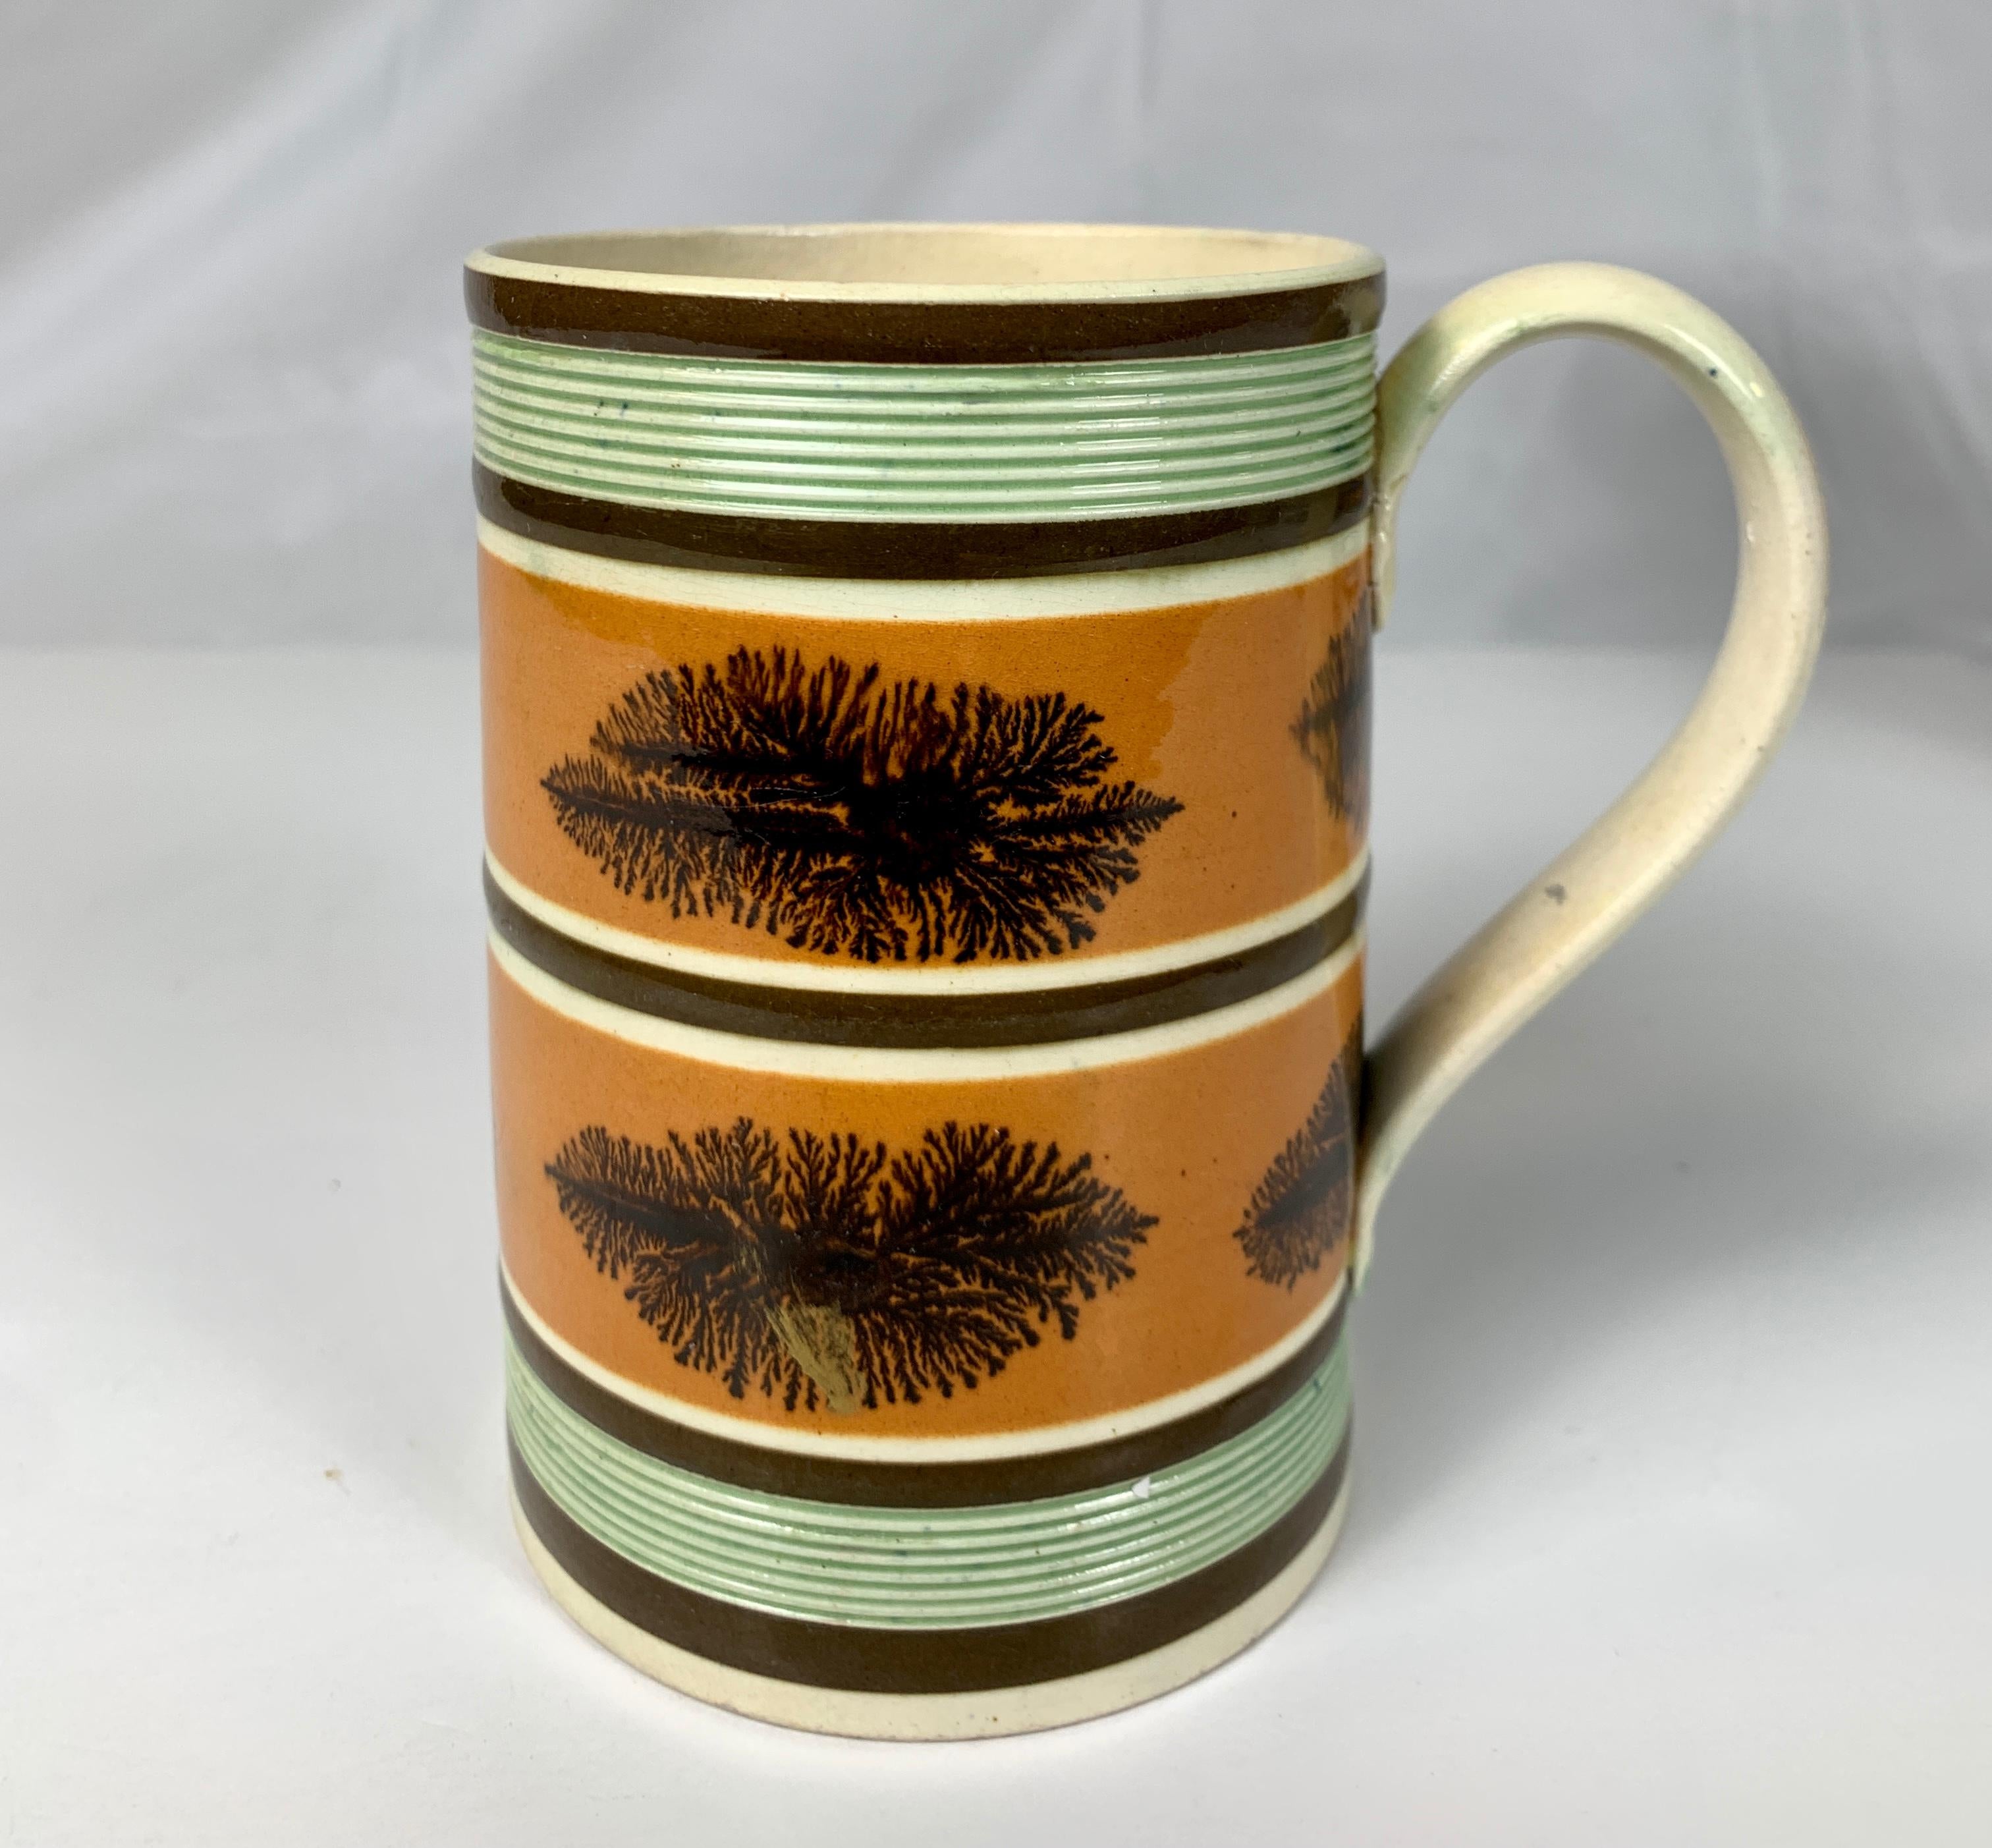 Made in England circa 1810, this exquisite mug is decorated with two orange-colored slip bands. Each band is decorated with midnight brown 